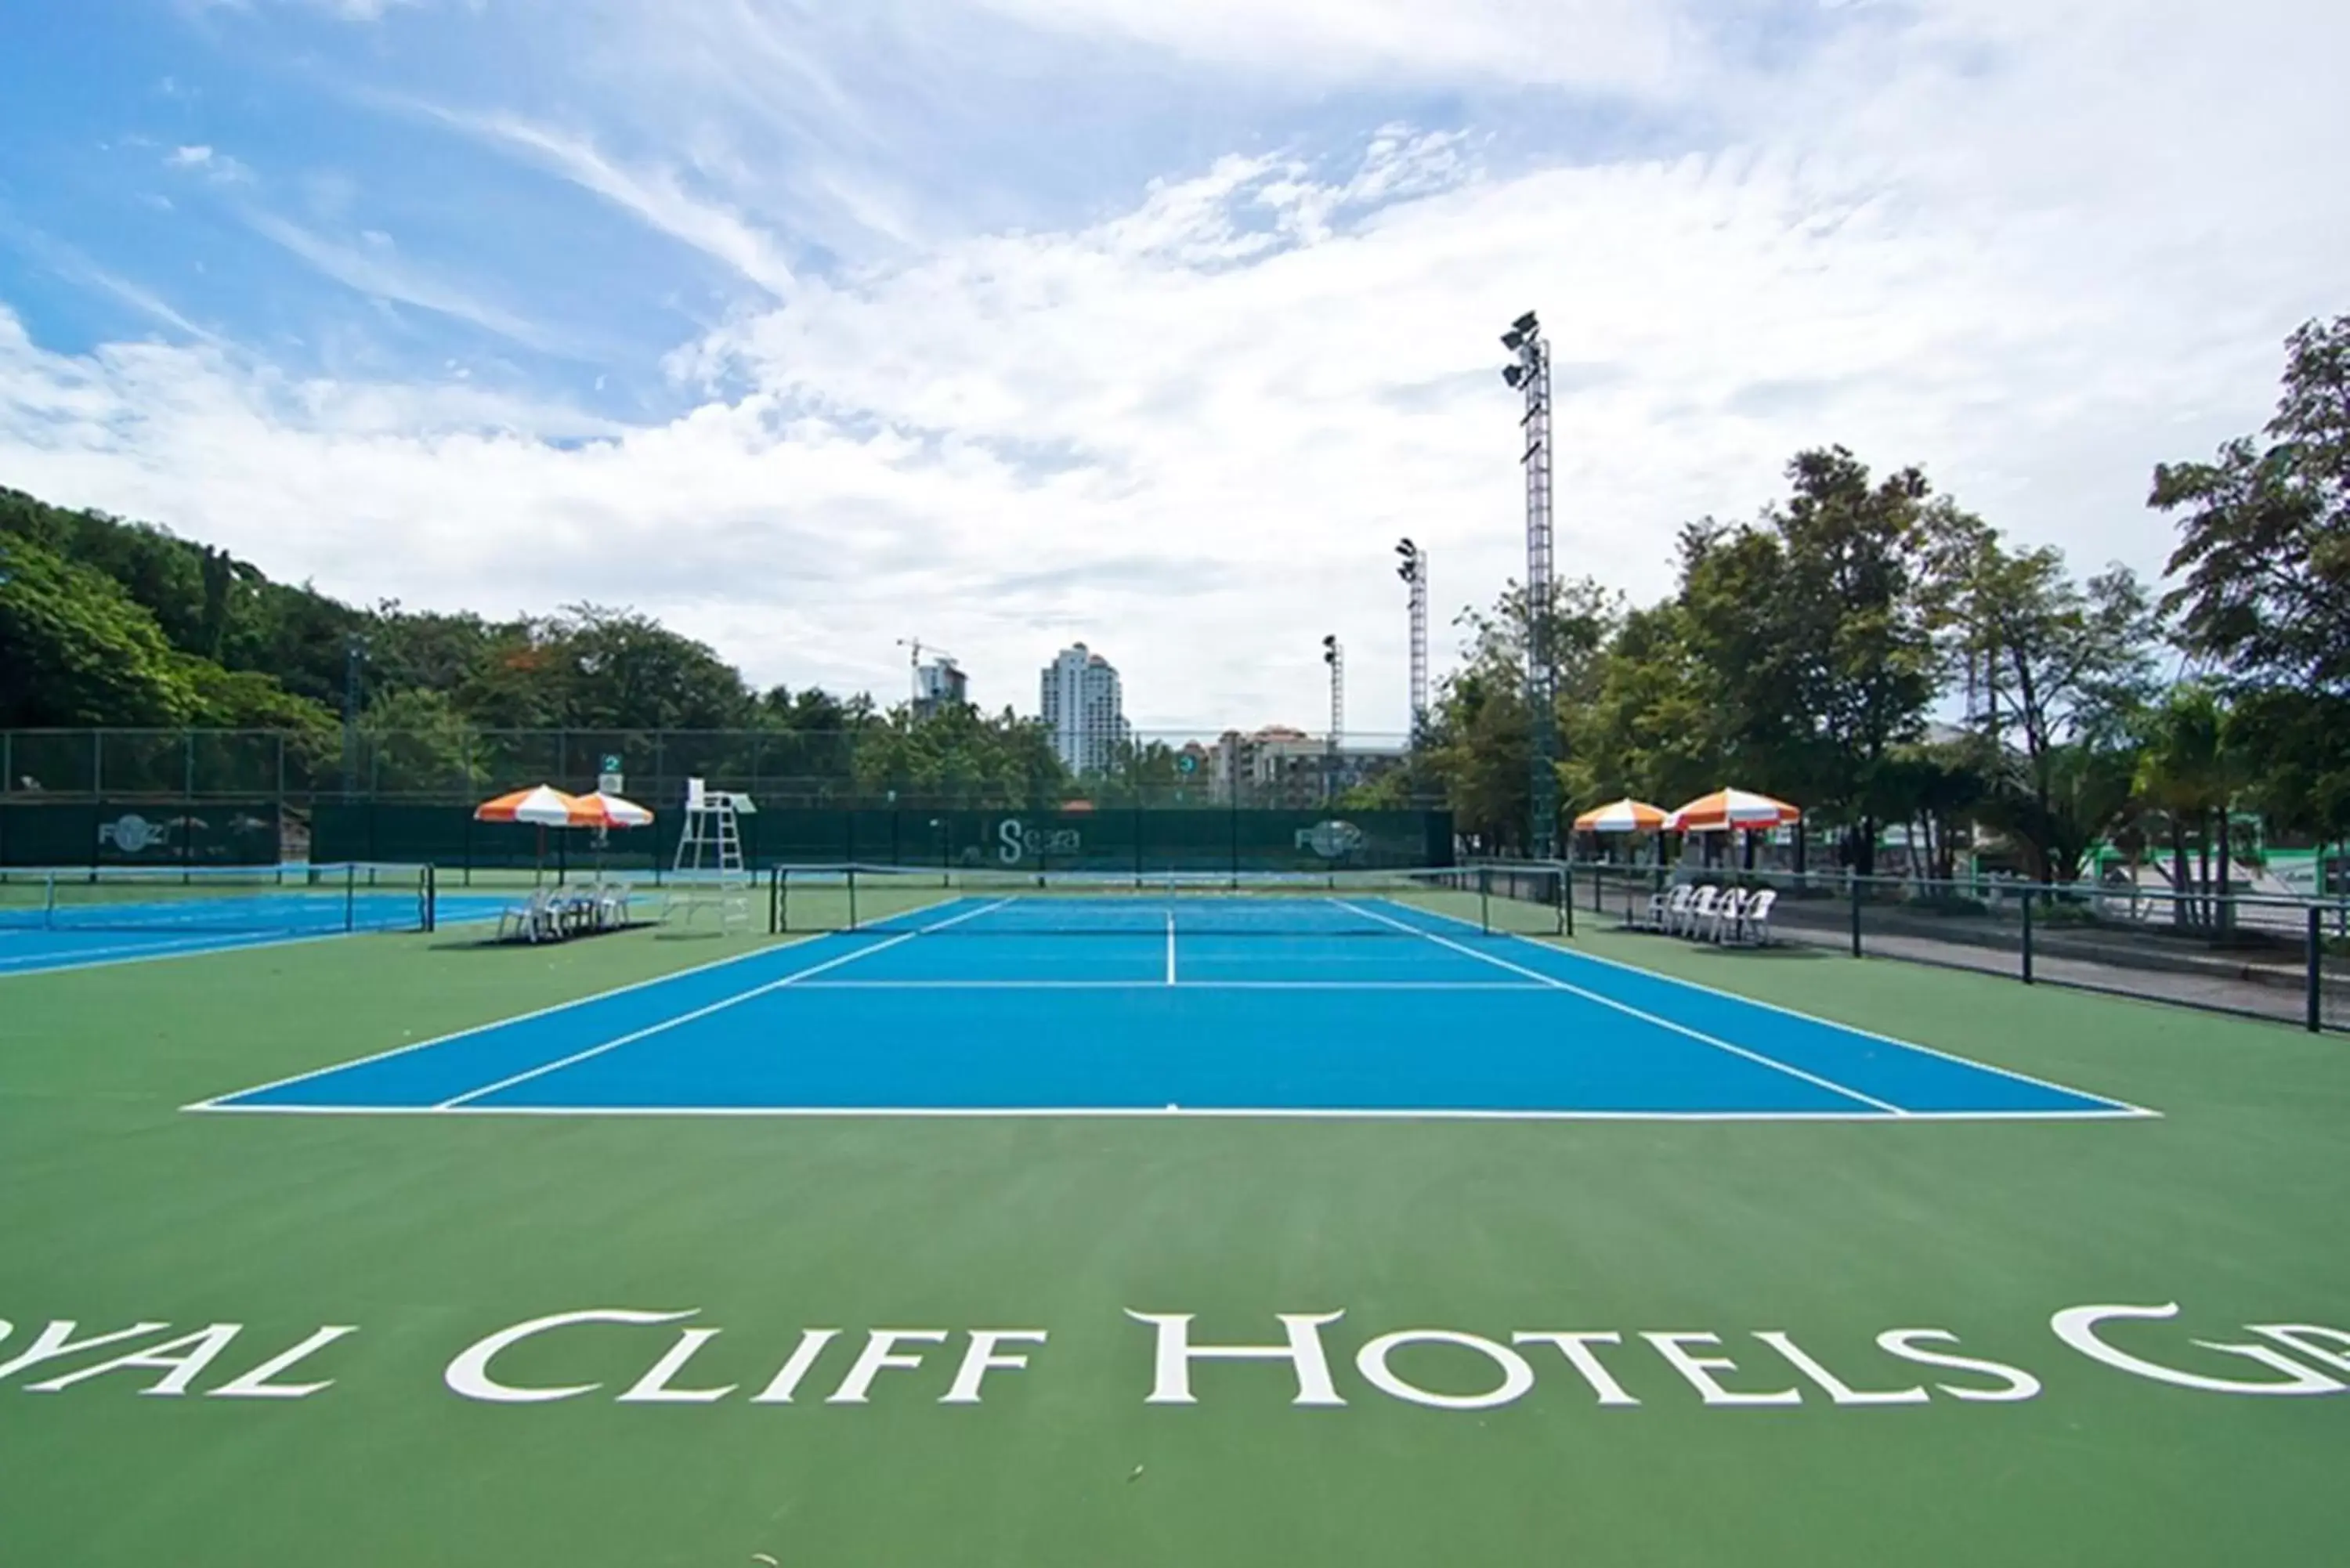 Tennis court, Other Activities in Royal Cliff Beach Hotel Pattaya